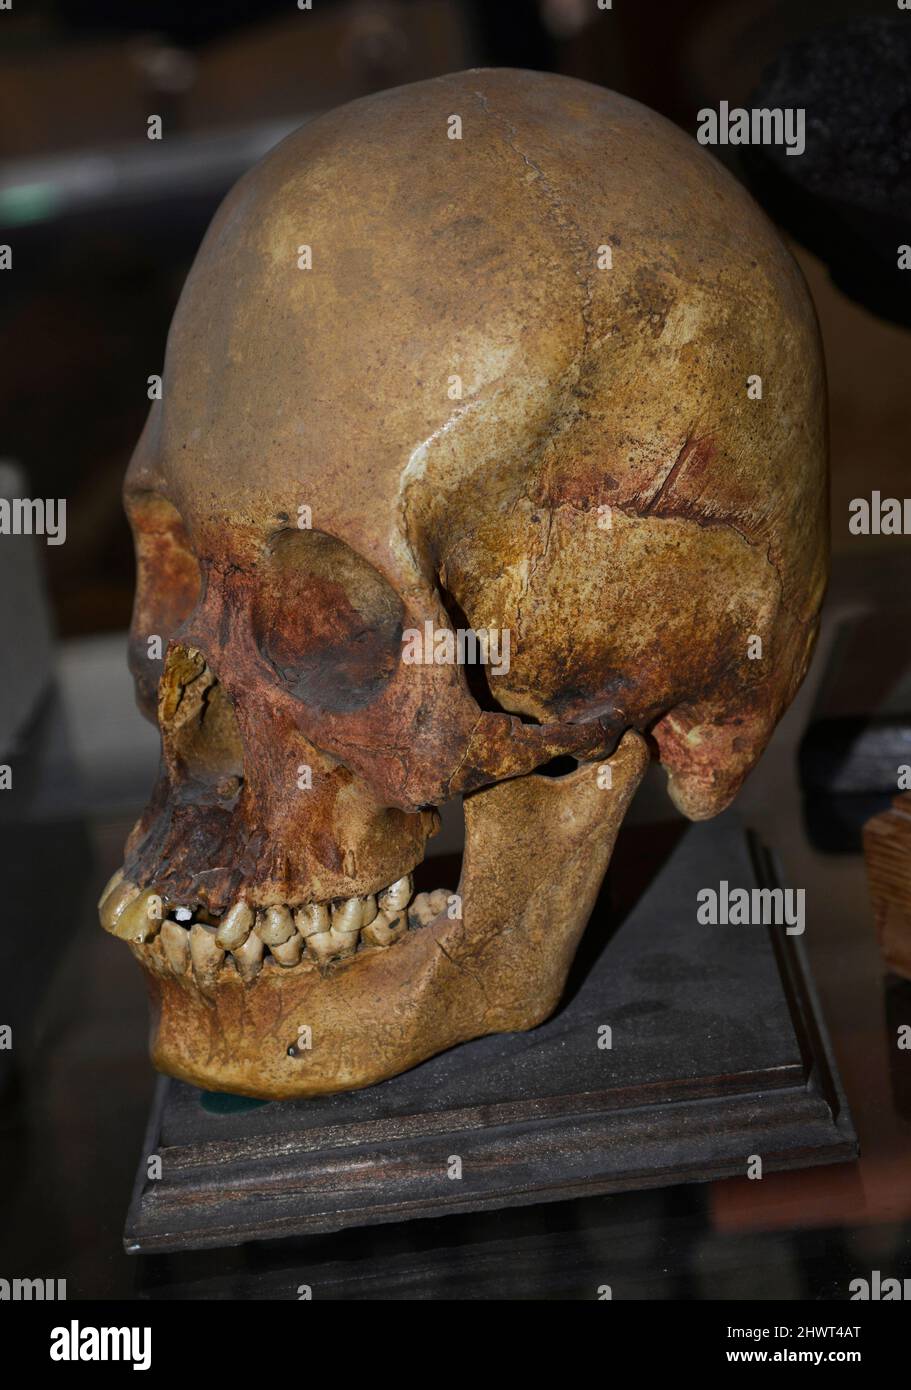 Intentional skull deformation was performed in ancient cultures around the world.  It was done on infants for  social reasons by the ancient cultures. Stock Photo